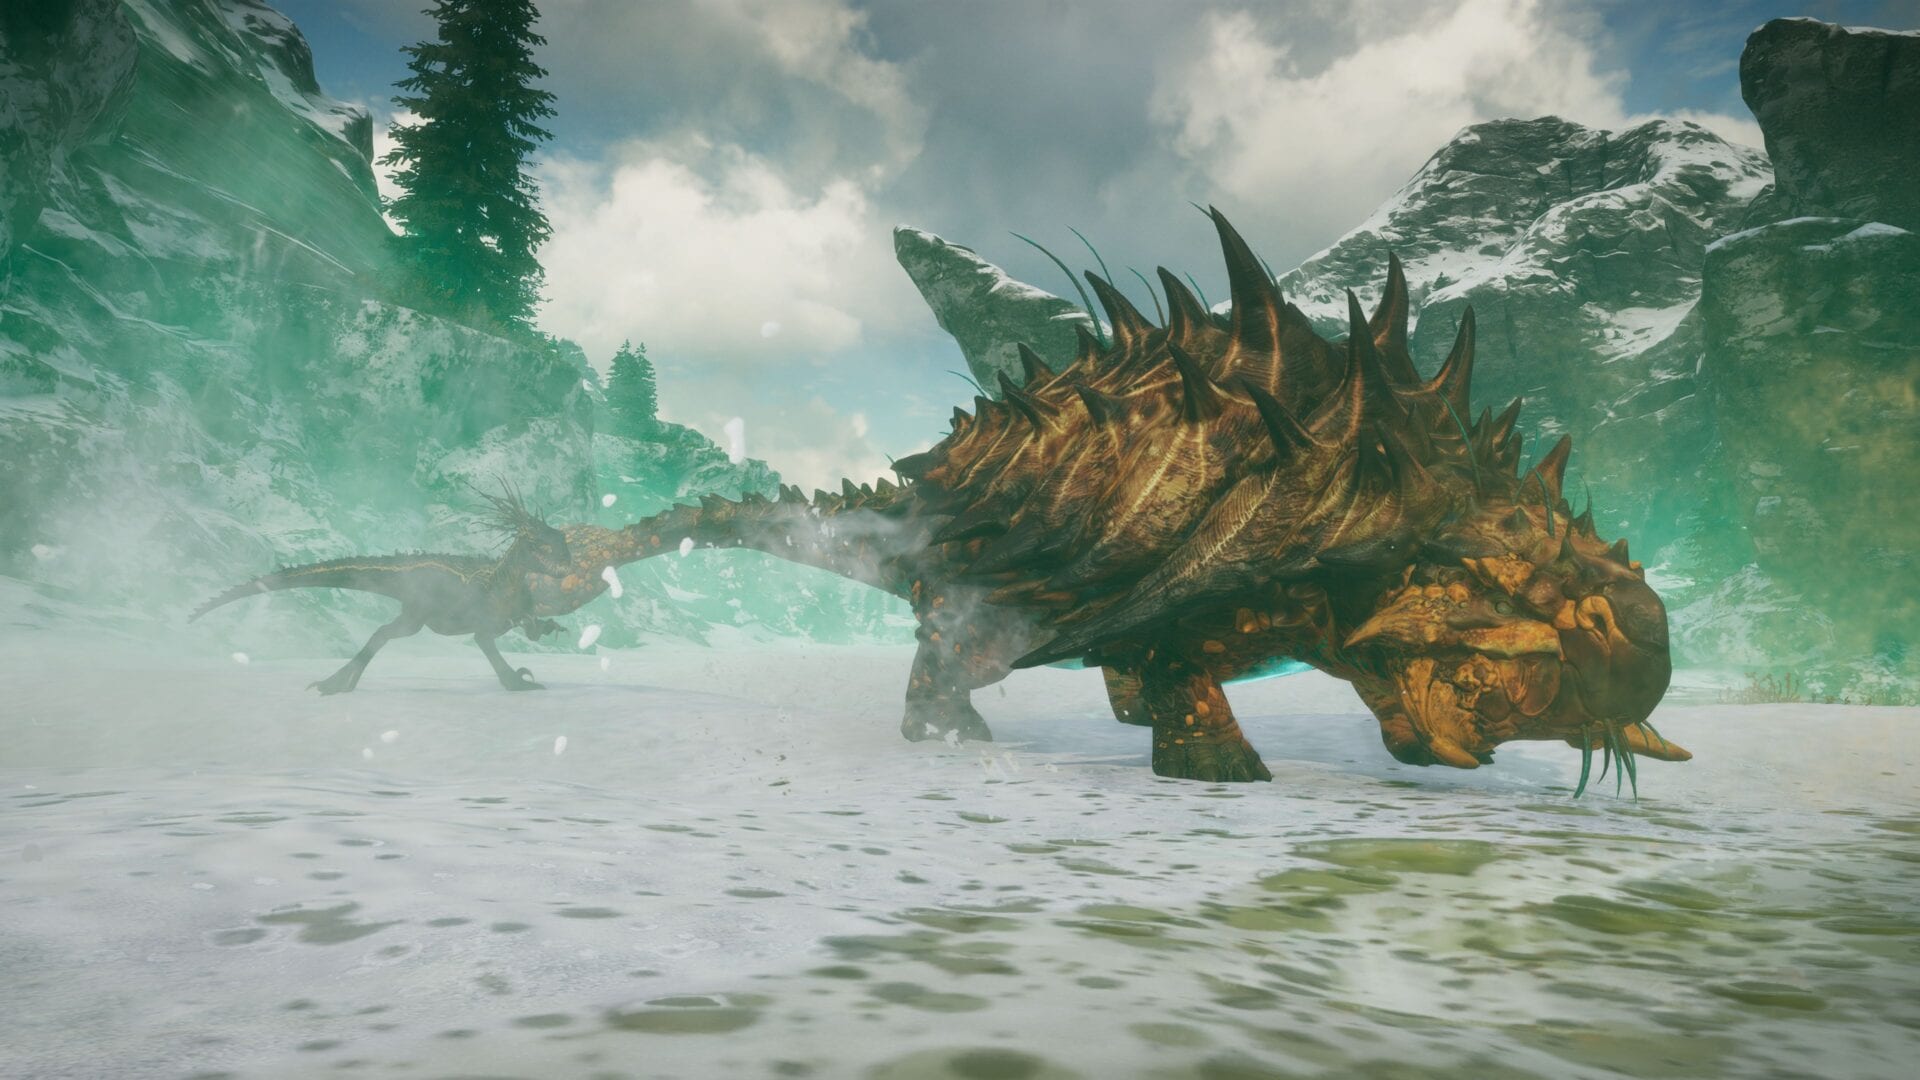 second extinction xbox one release date